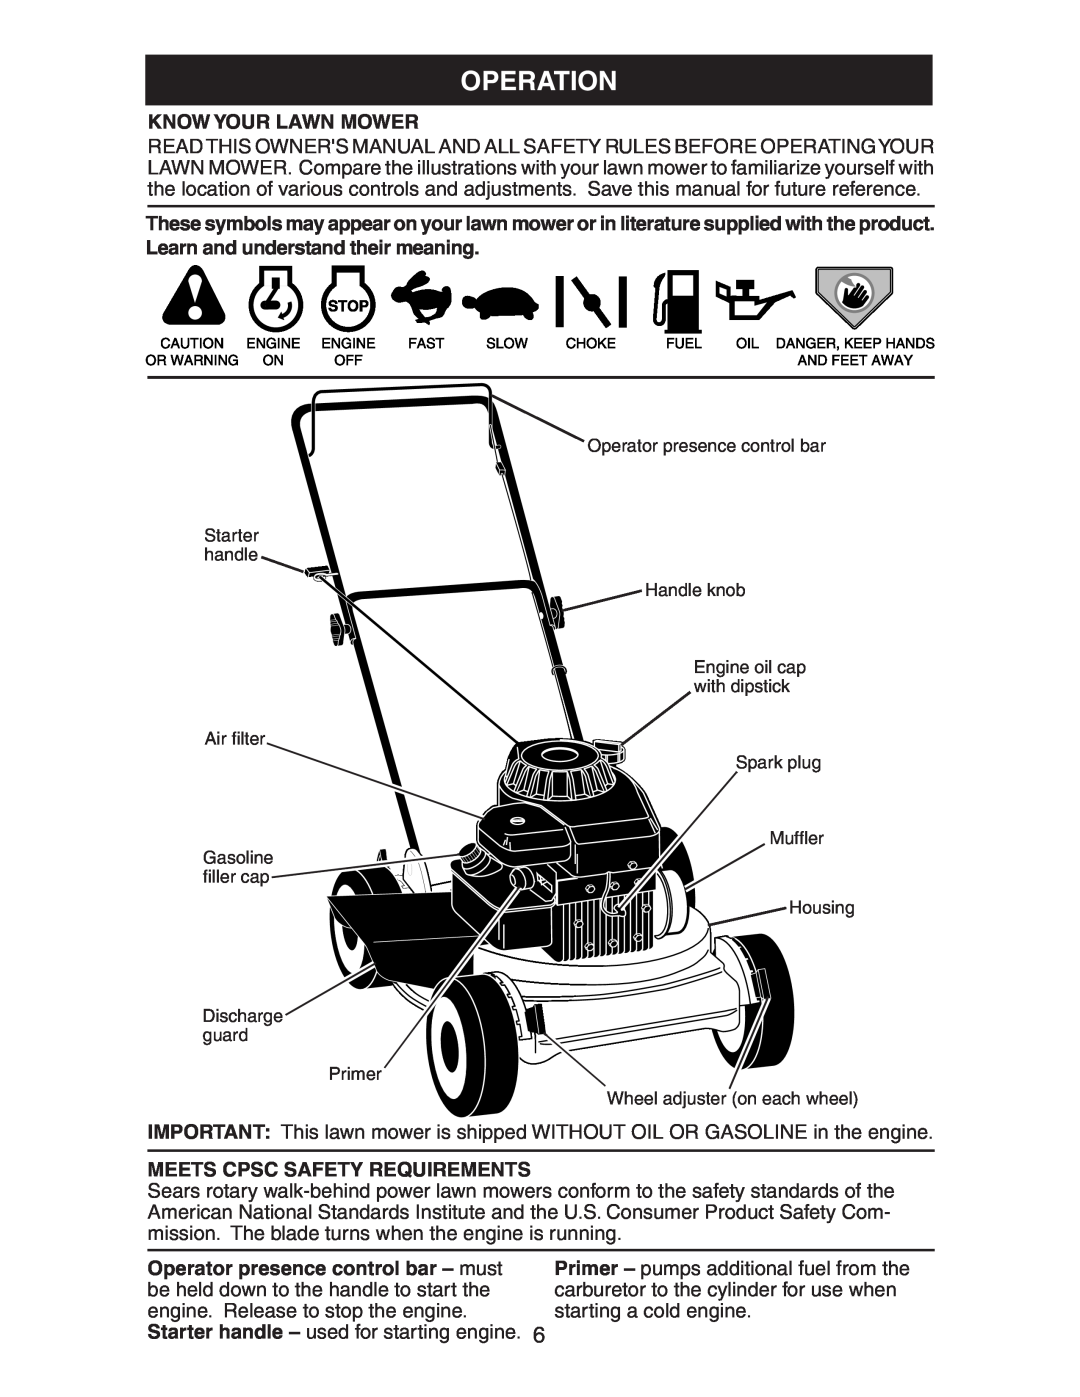 Poulan 224110X92E0, 225114X92E0, 2005-04 manual Operation, Know Your Lawn Mower, Meets Cpsc Safety Requirements 